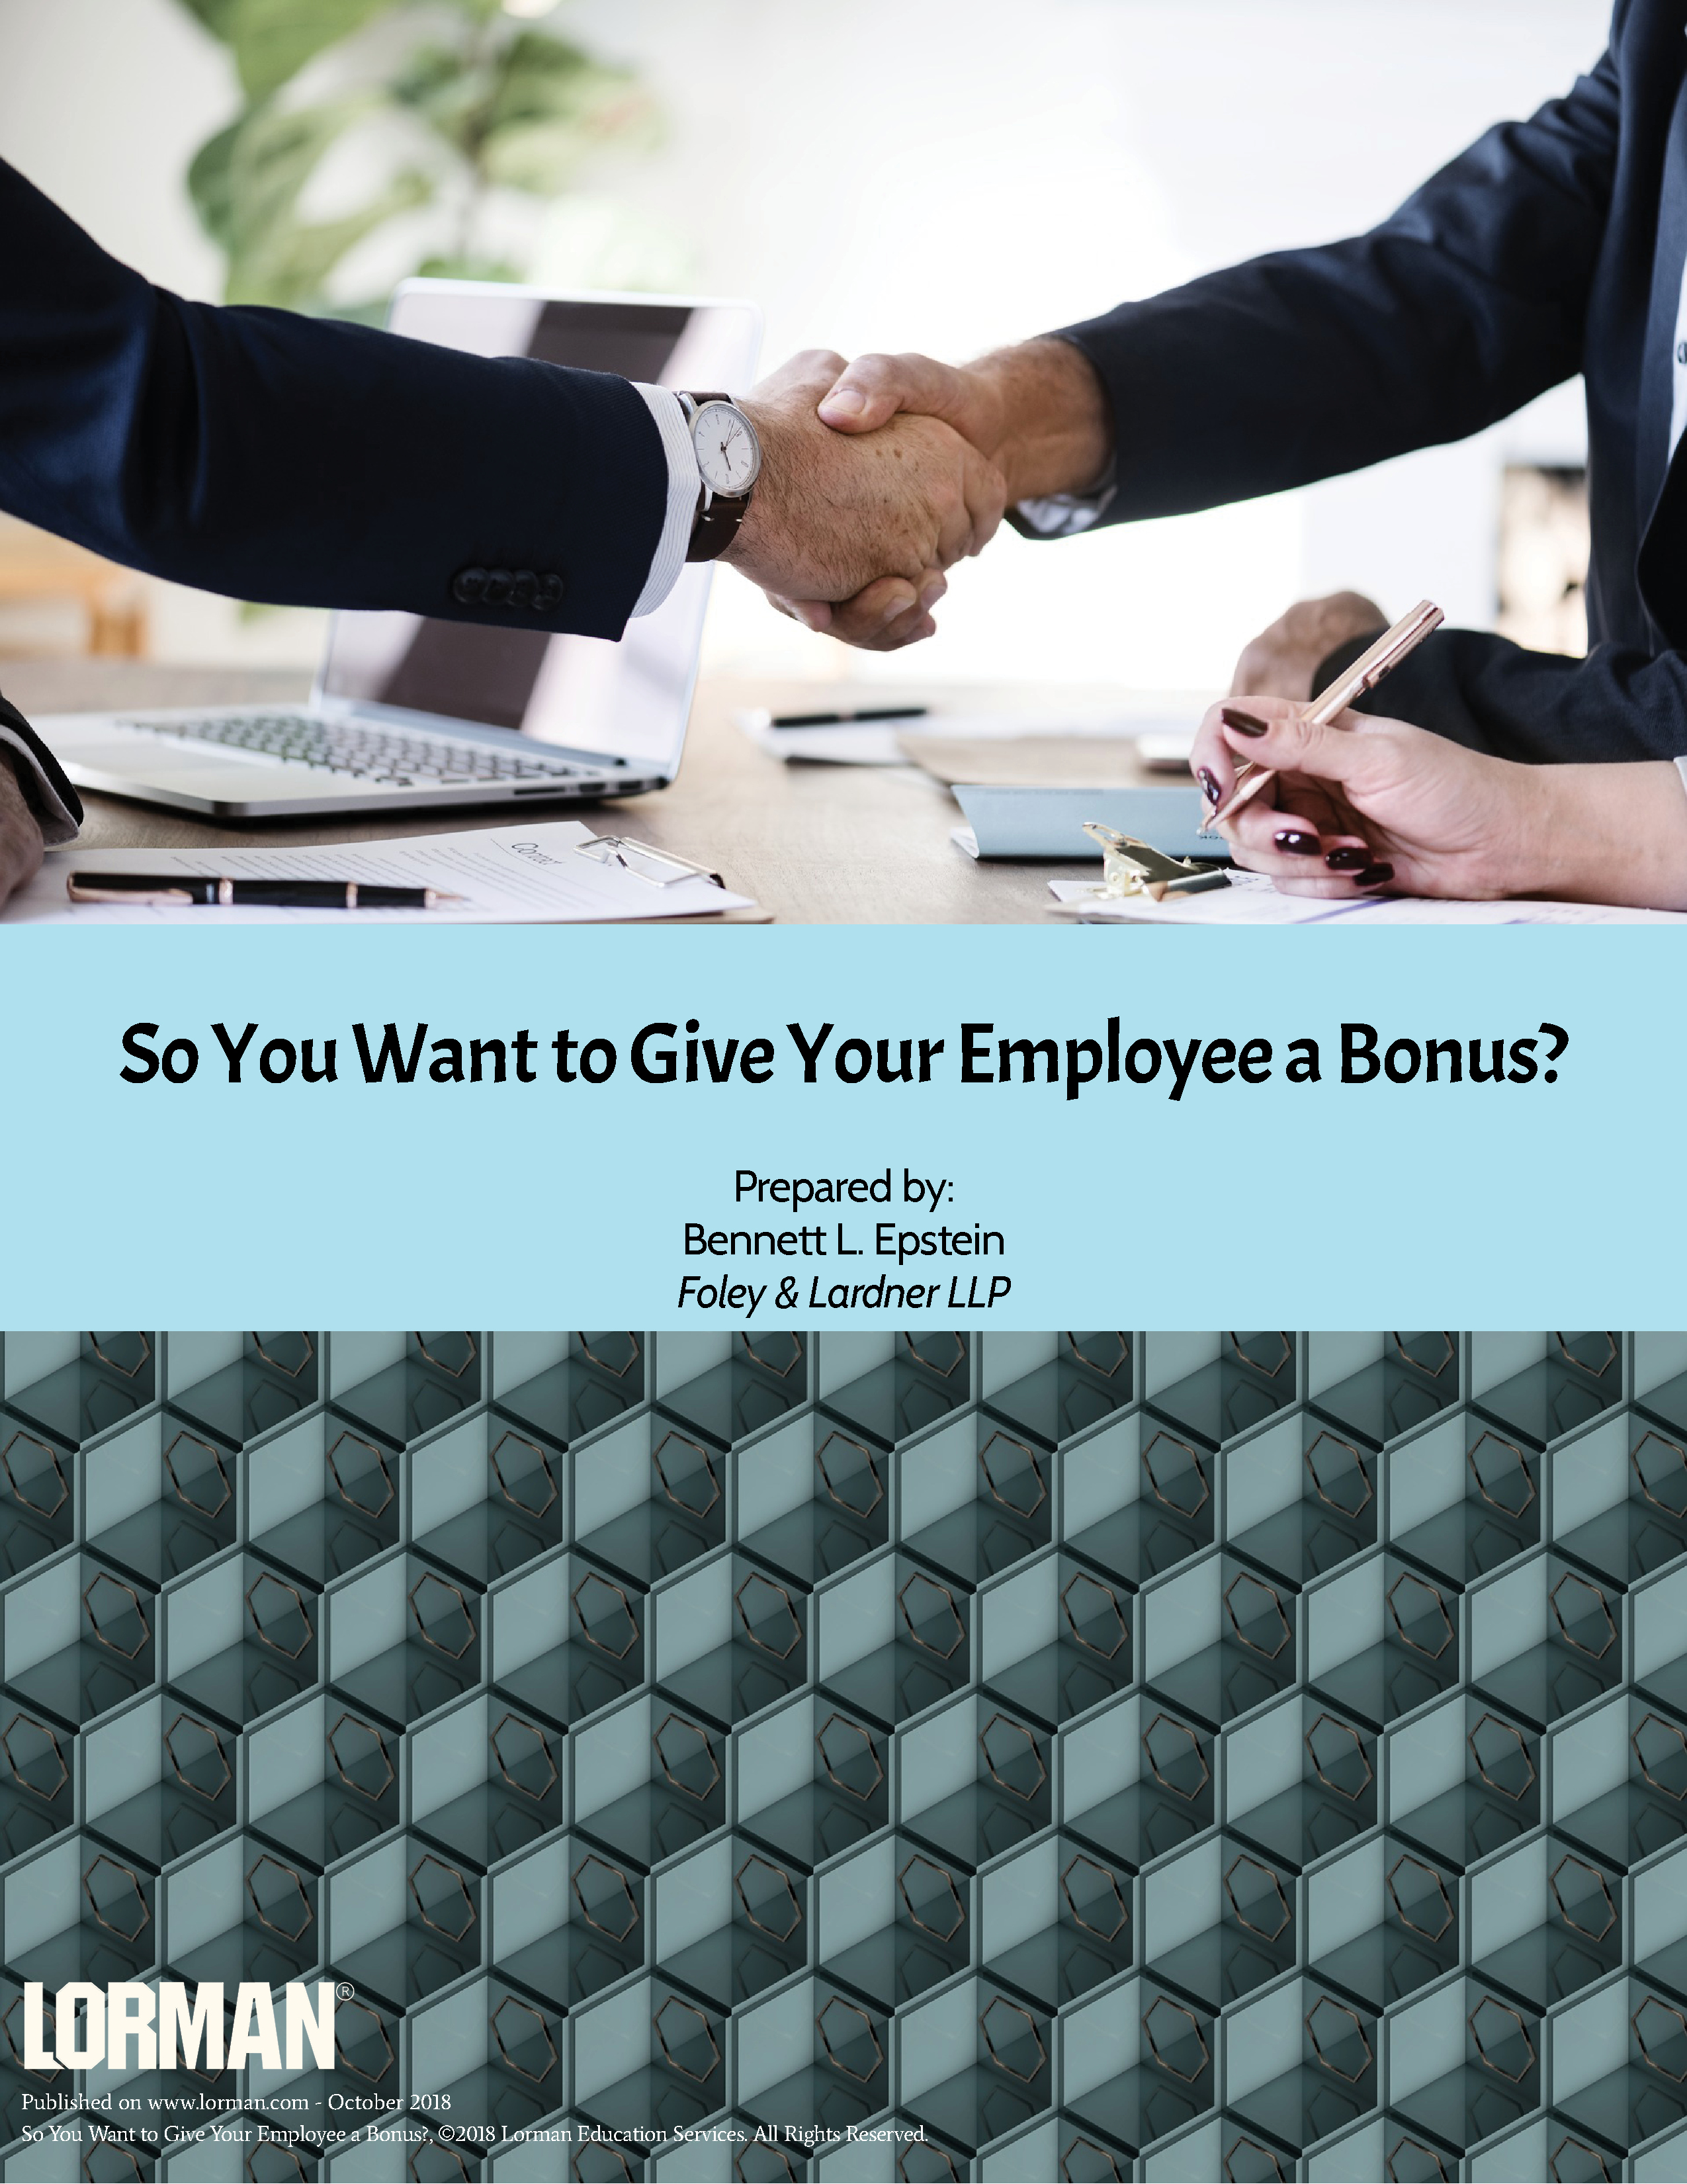 So You Want to Give Your Employee a Bonus?